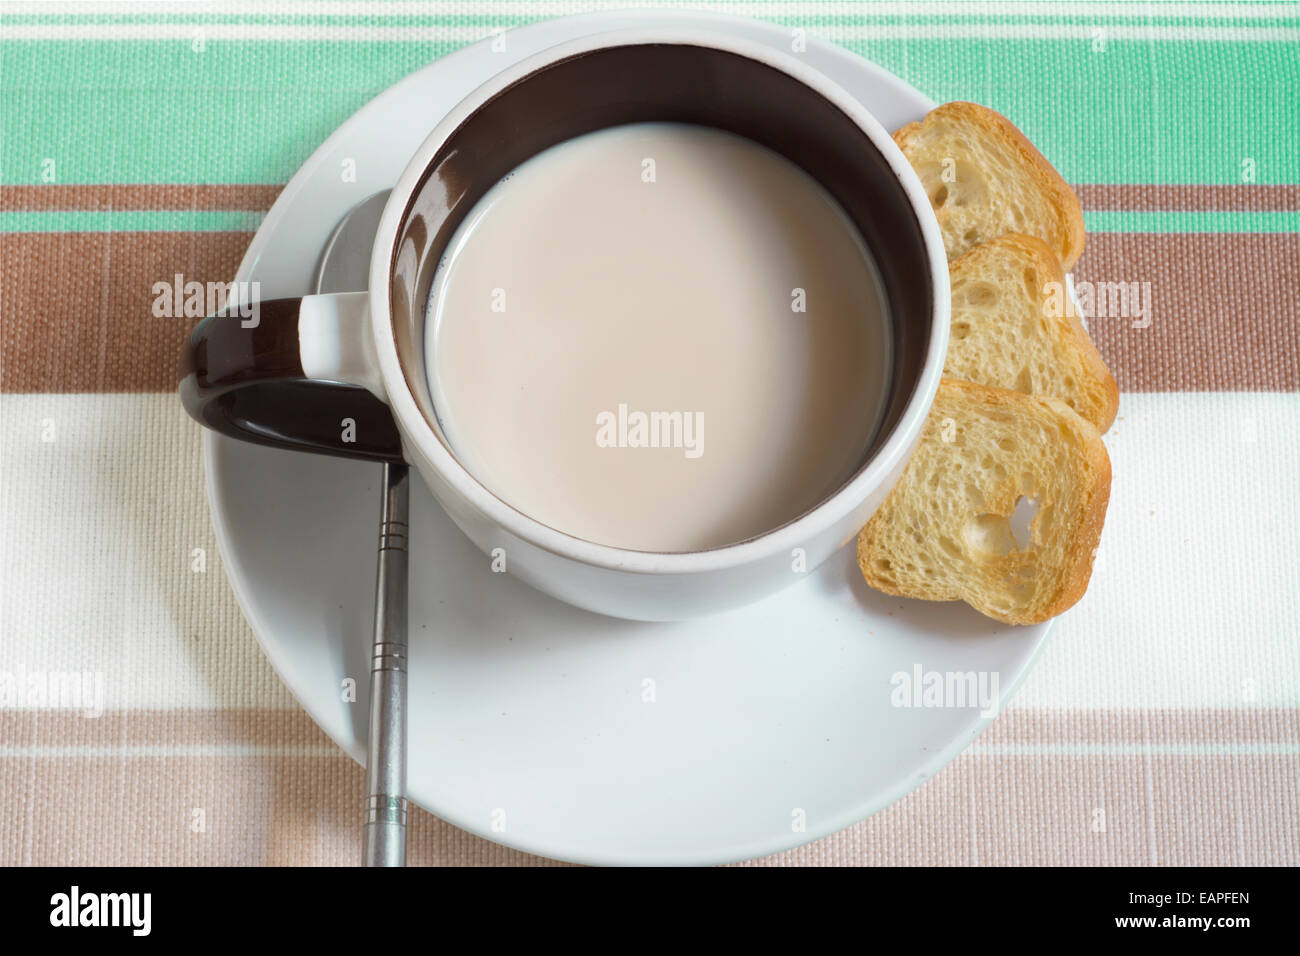 Aerial view of light breakfast, tea or coffee with milk, decorated striped background Stock Photo